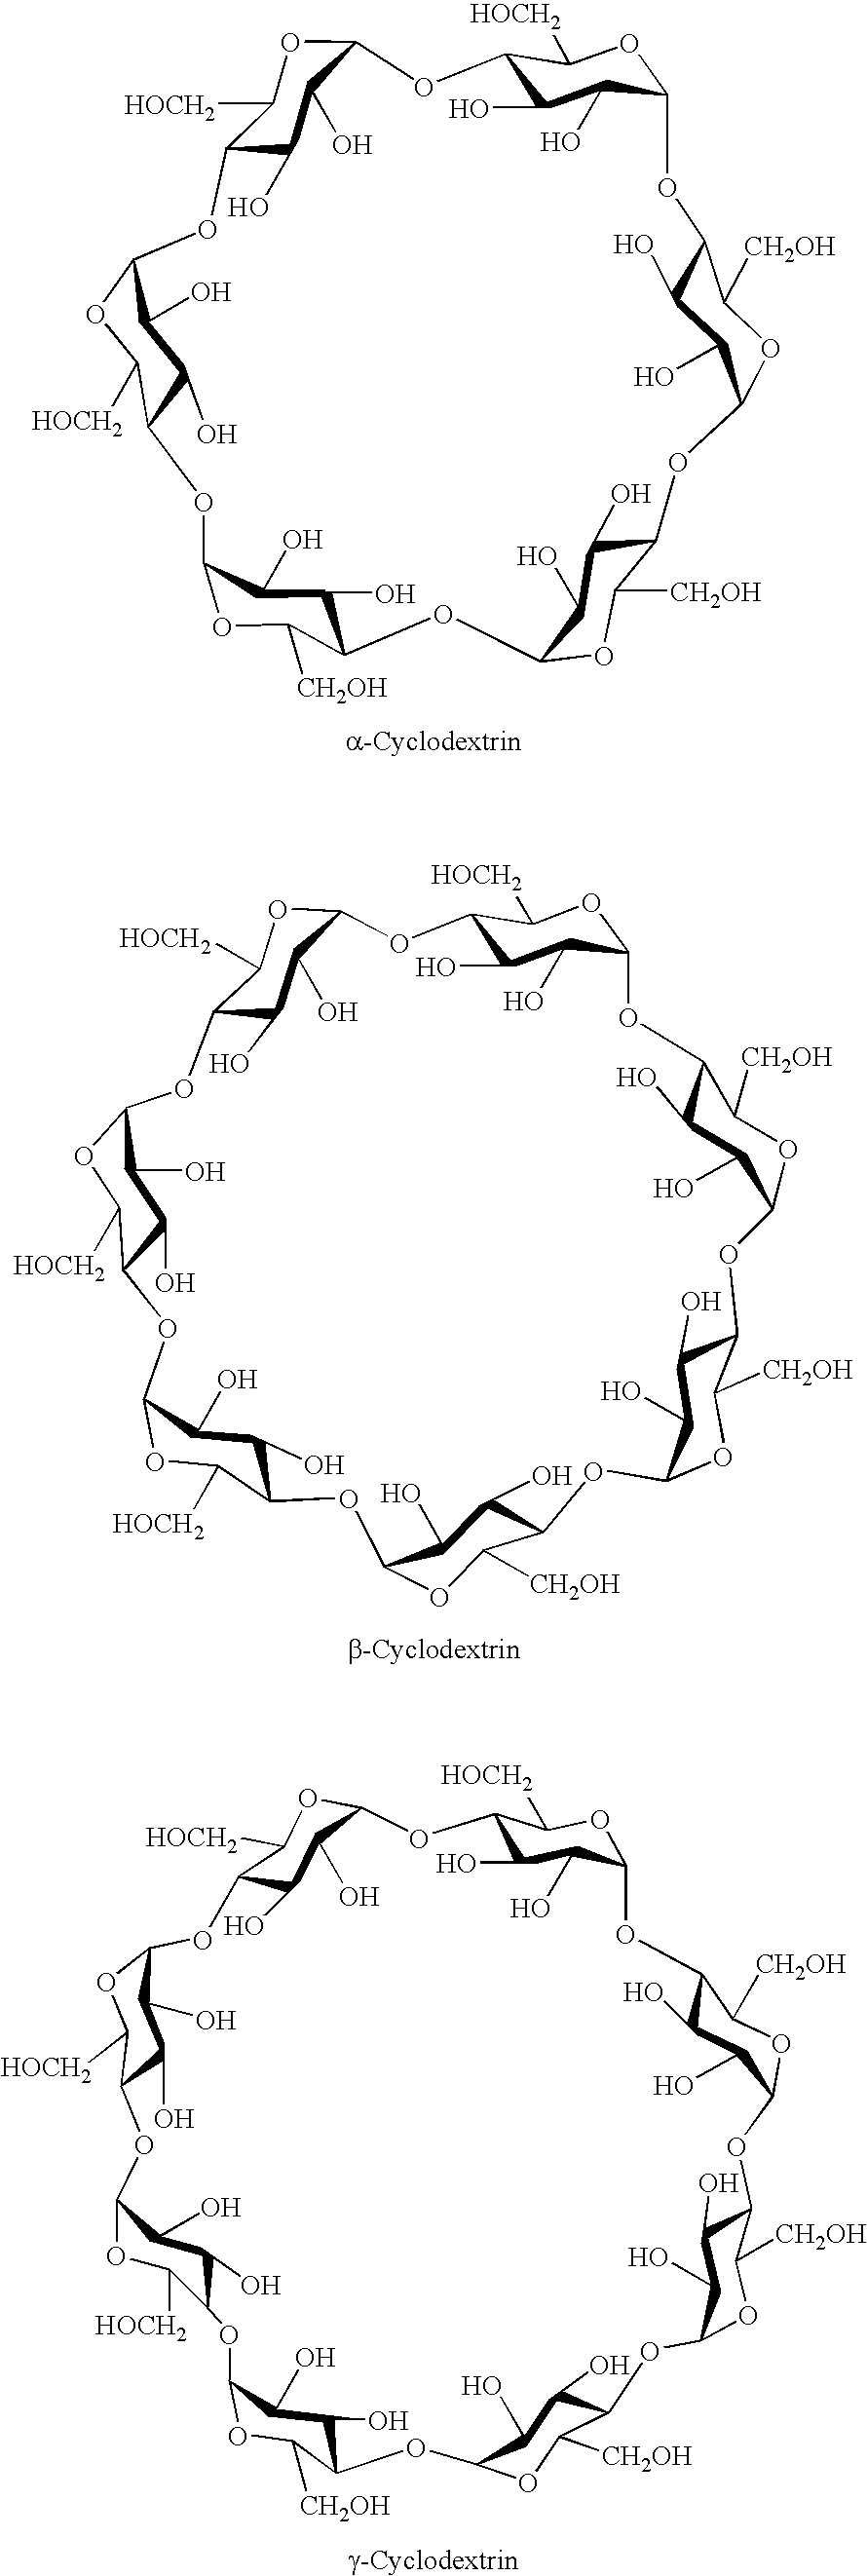 Self-adhesive polymer matrix containing a seaweed extract